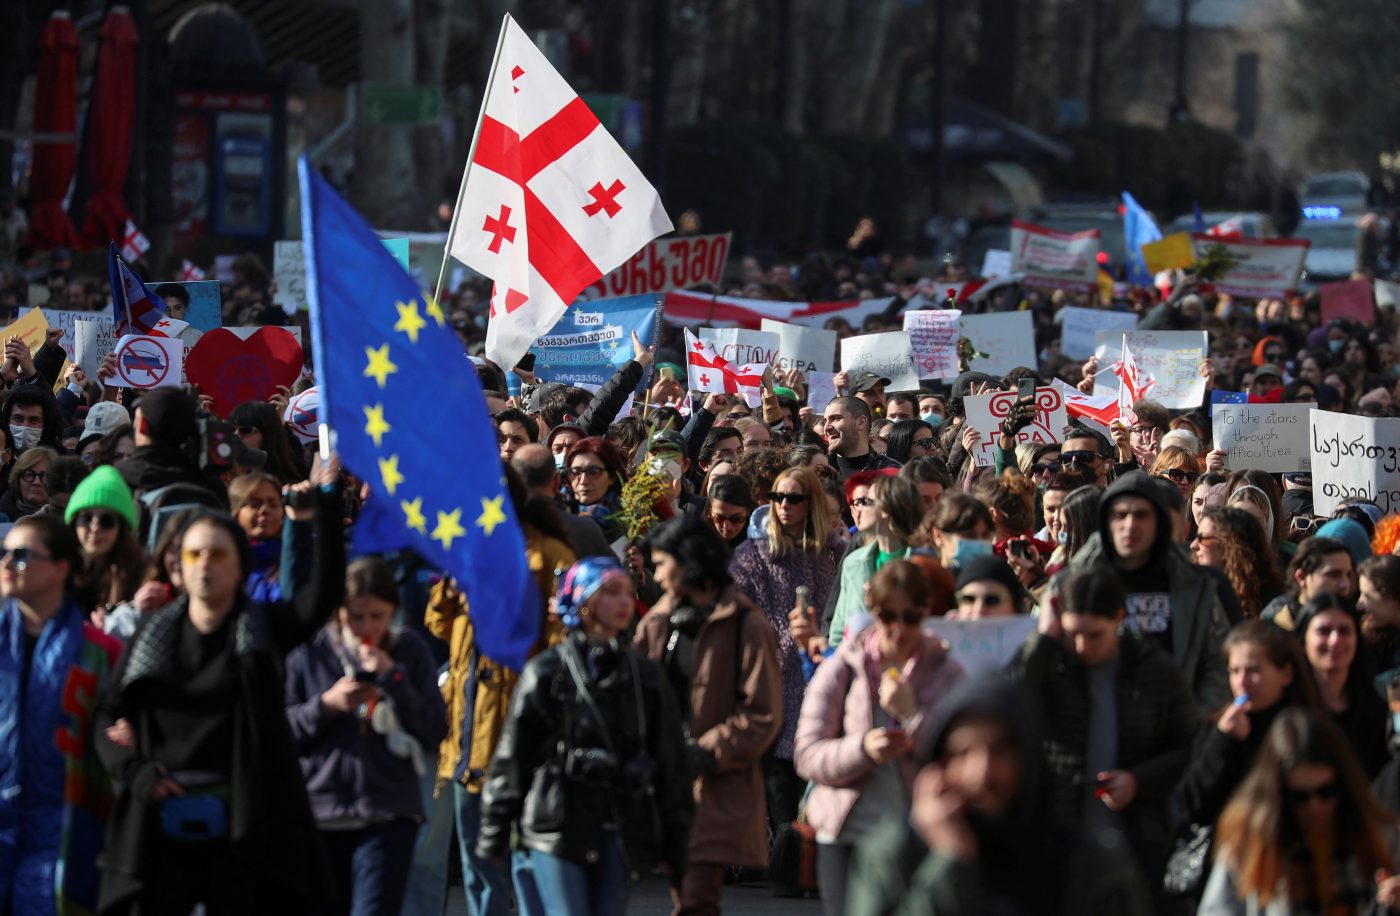 Photo: Participants march during a protest against a draft law on "foreign agents", which critics say represents an authoritarian shift and could hurt Georgia's bid to join the European Union, in Tbilisi, Georgia, March 8, 2023. Credit: REUTERS/Irakli Gedenidze